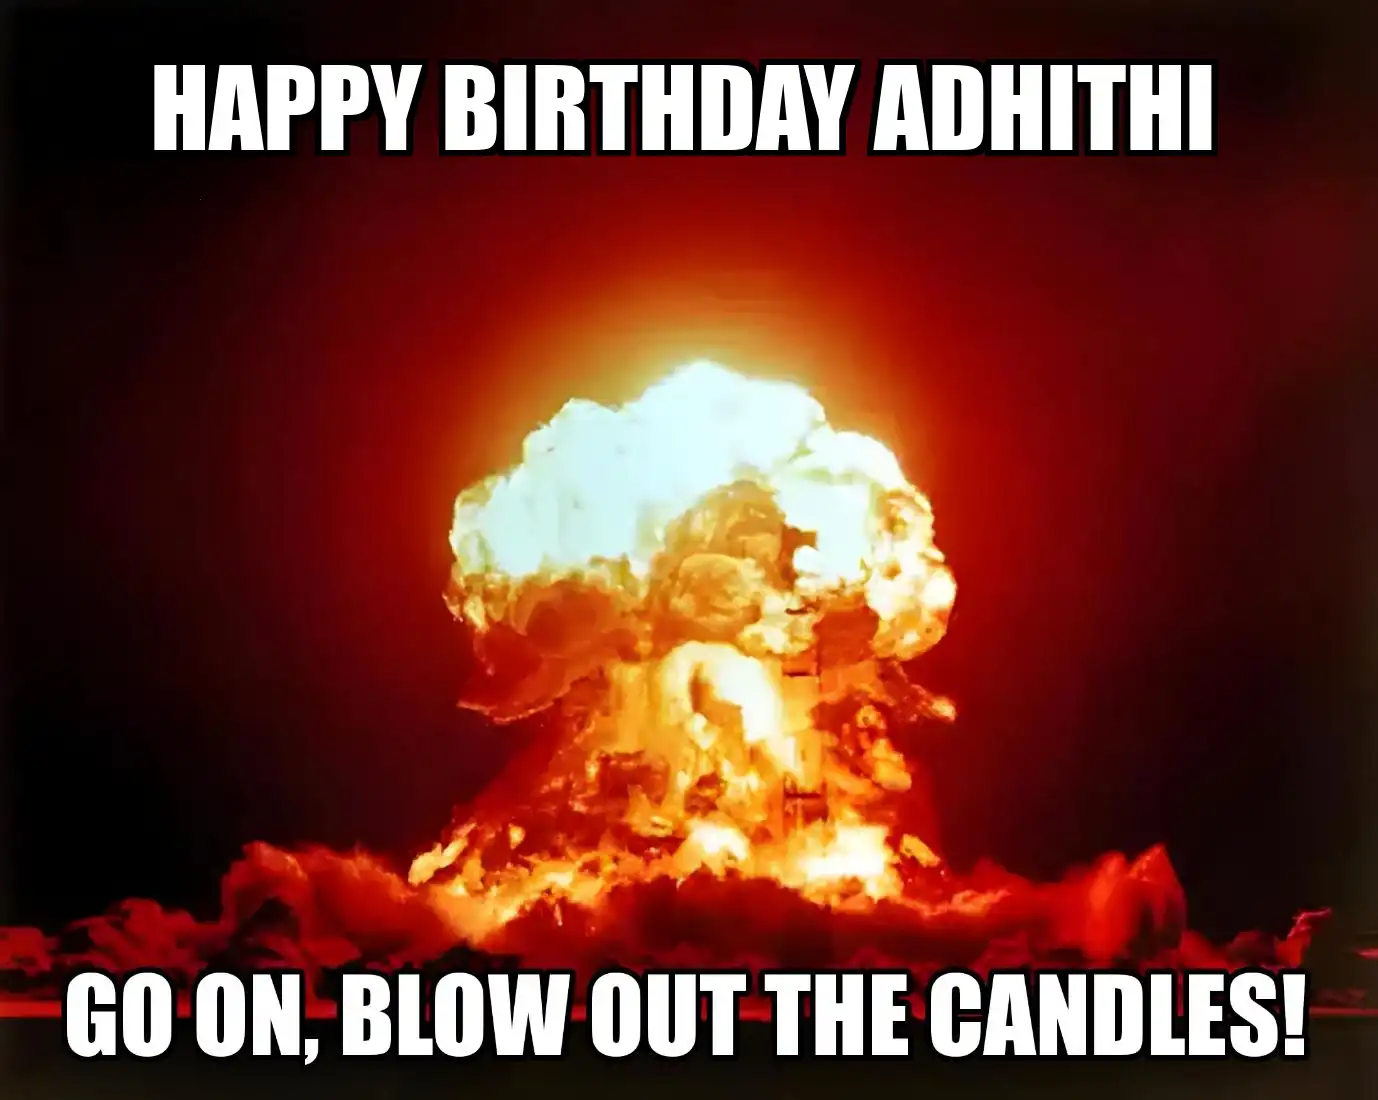 Happy Birthday Adhithi Go On Blow Out The Candles Meme